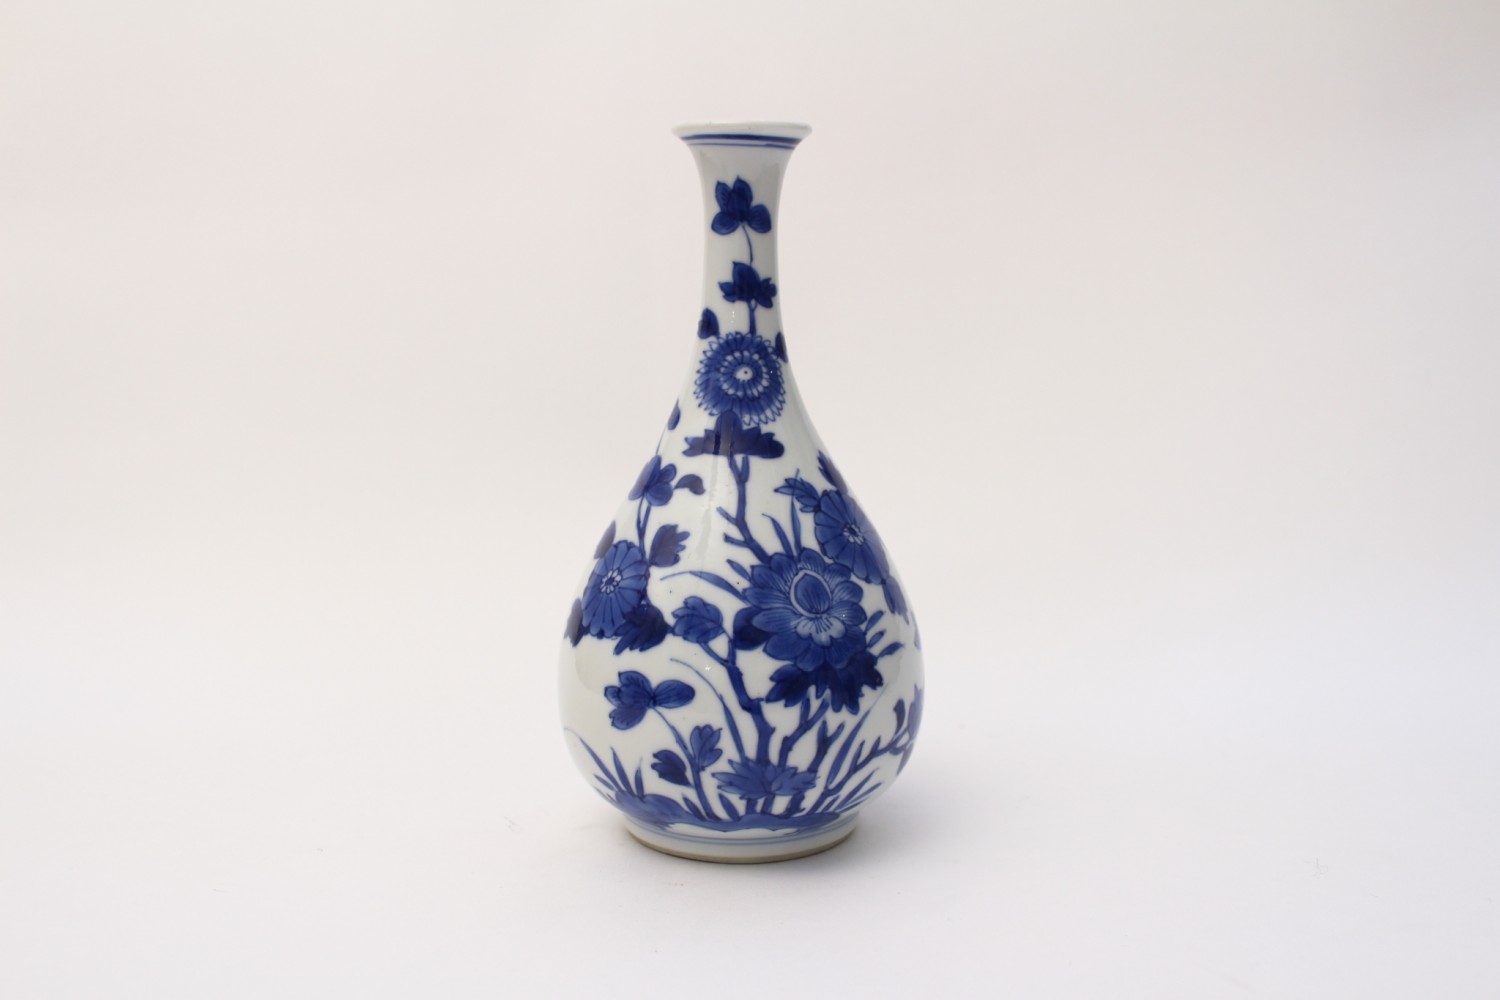 A small blue and white bottle vase